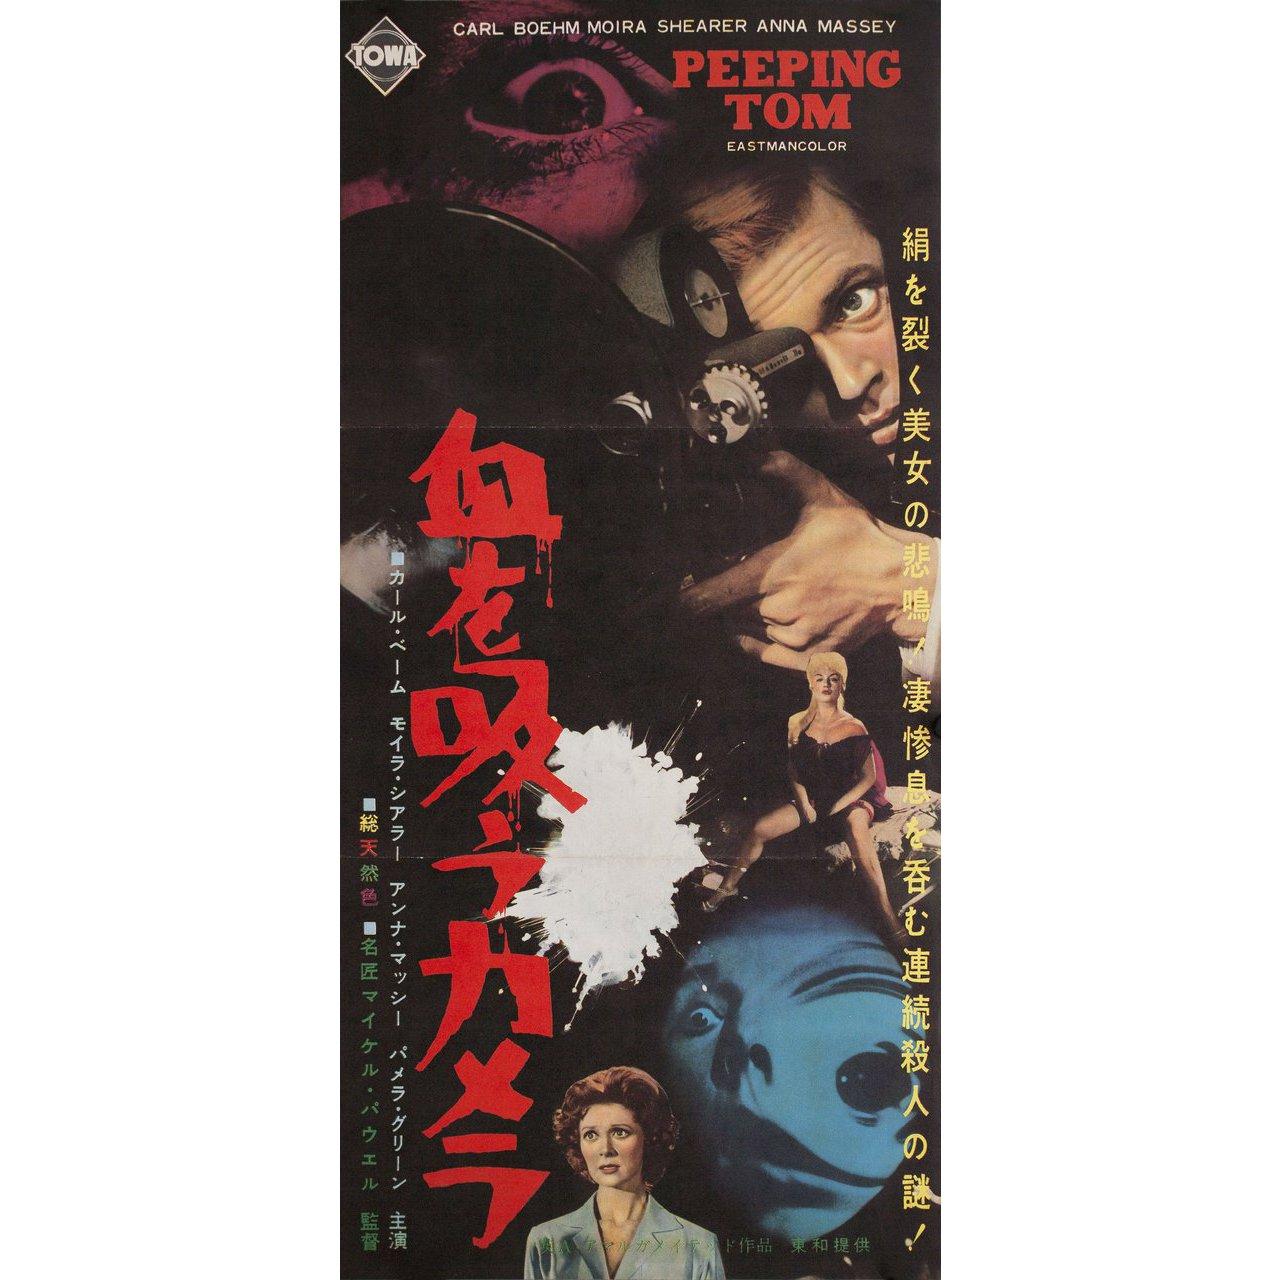 Original 1960 Japanese press poster for the film Peeping Tom directed by Michael Powell with Karlheinz Bohm / Moira Shearer / Anna Massey / Maxine Audley. Fine condition, folded. Many original posters were issued folded or were subsequently folded.